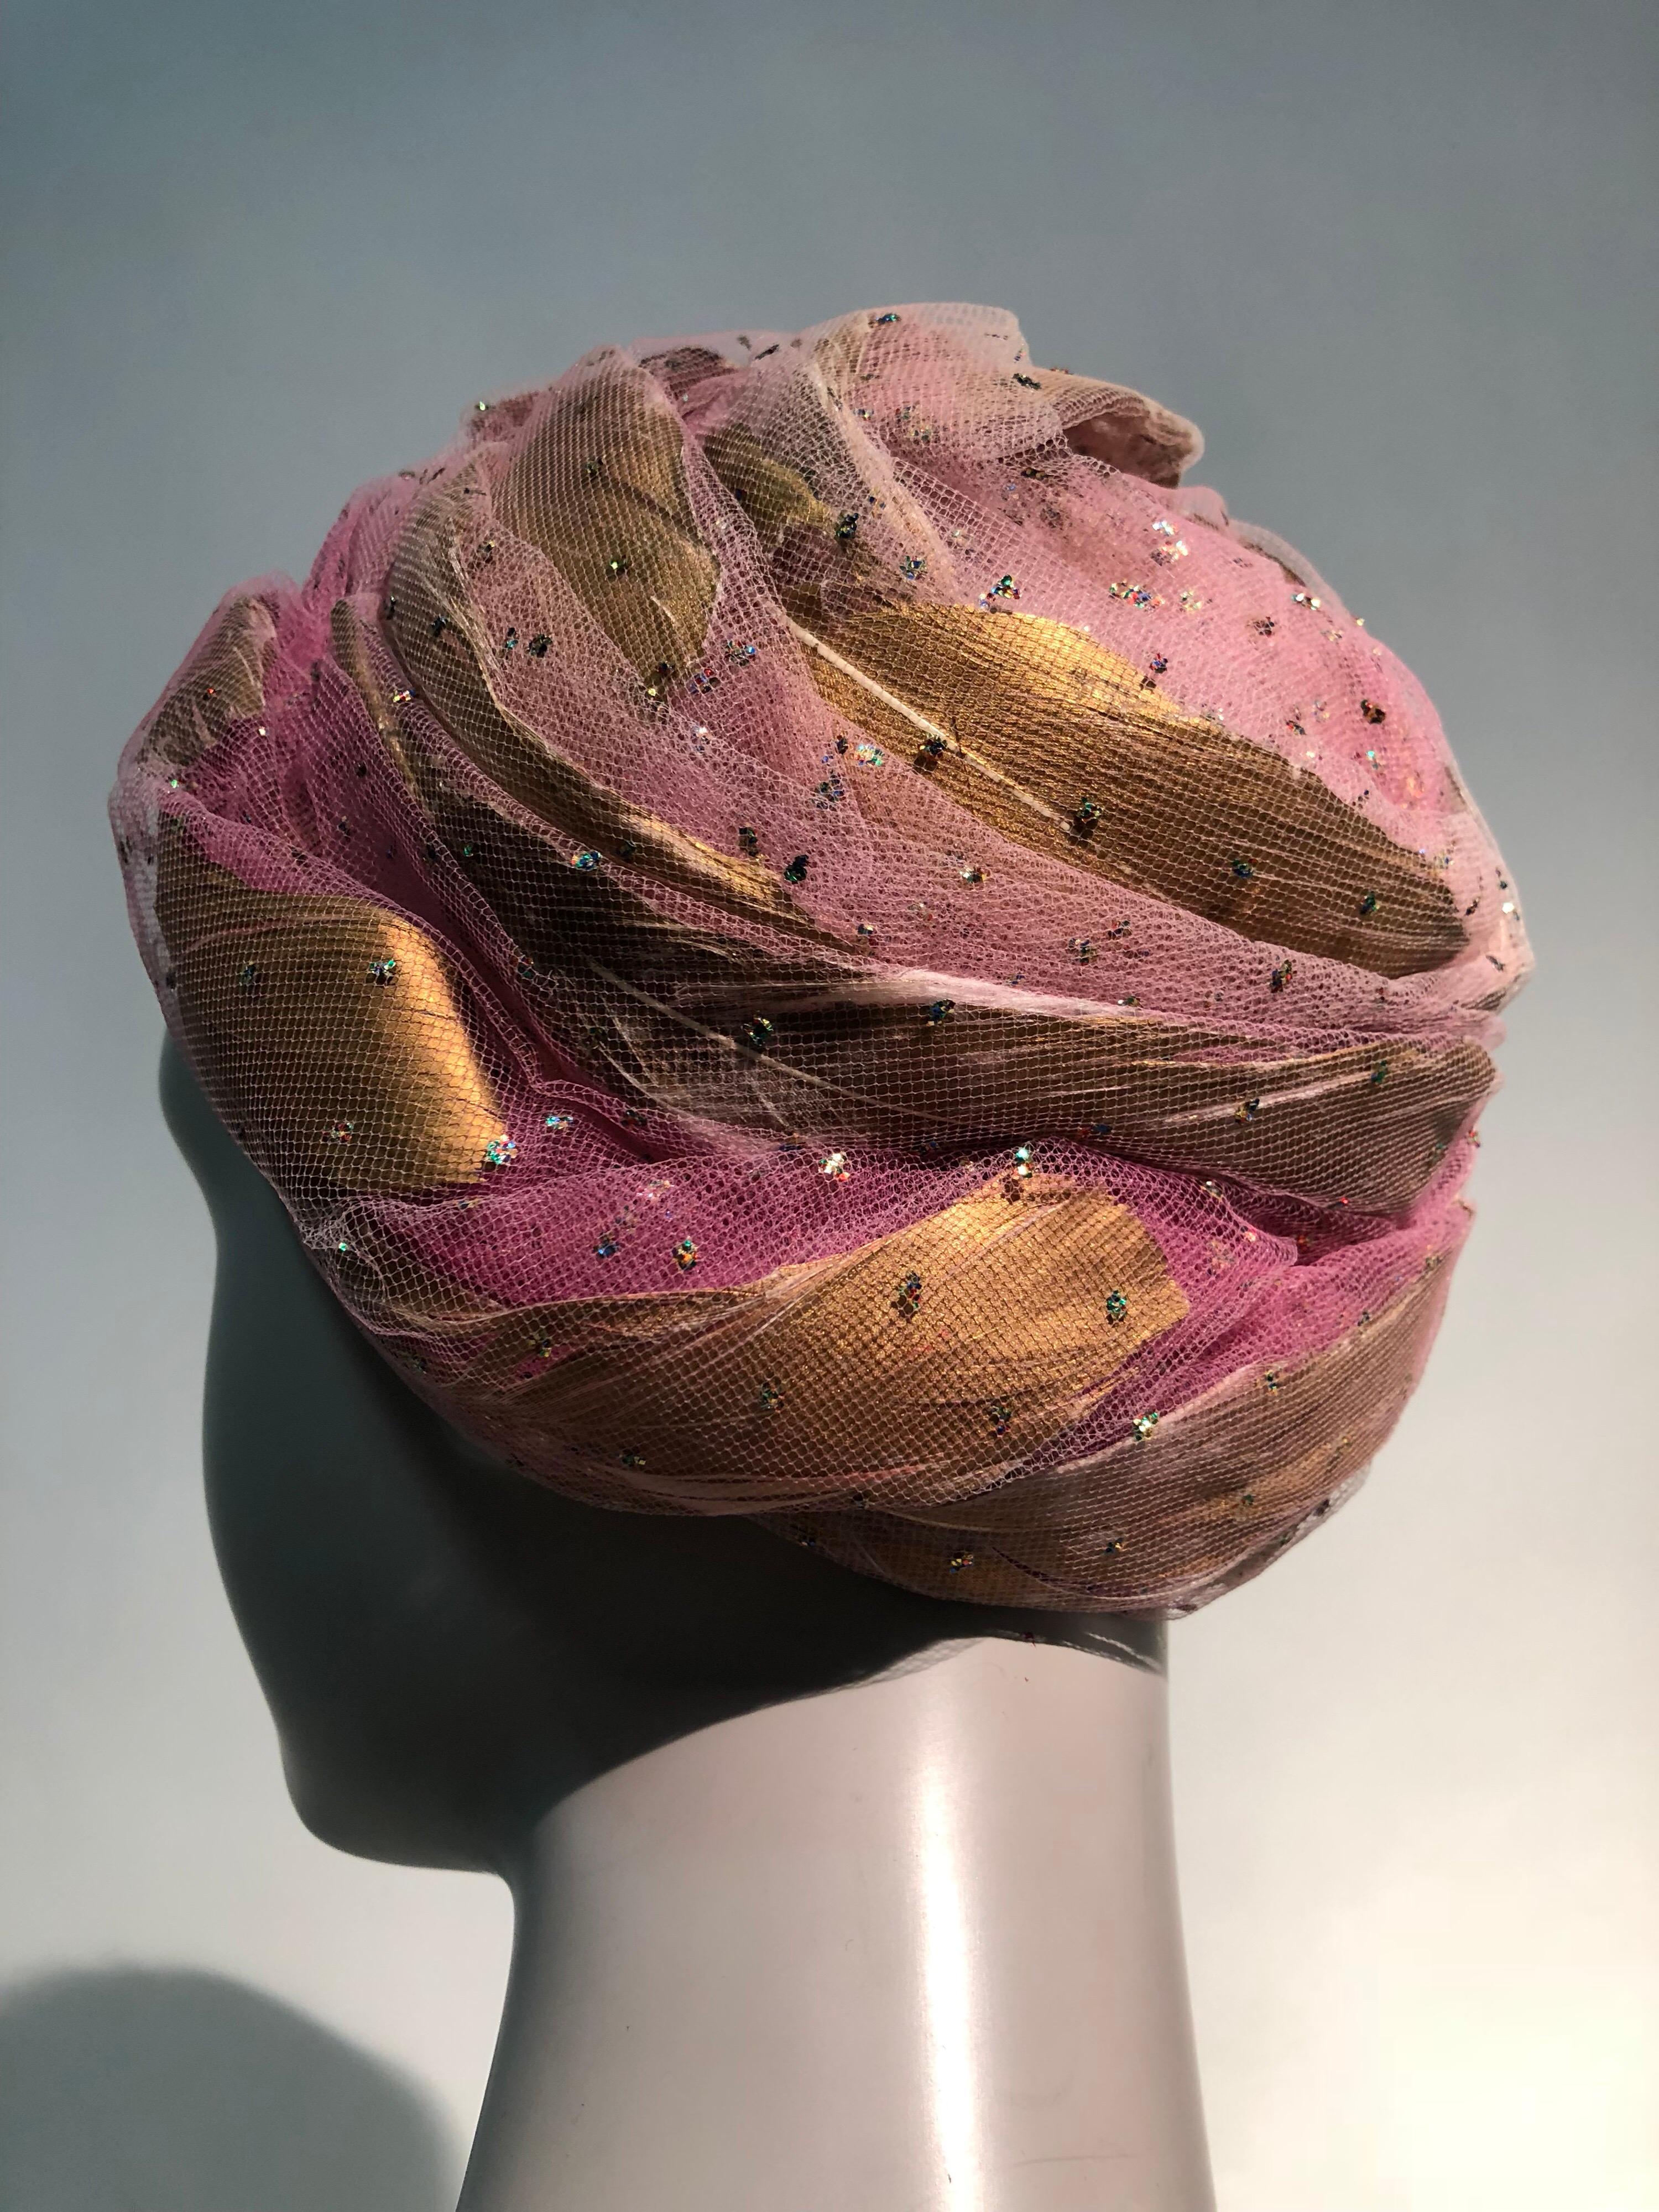 A fabulous 1960s Christian Dior beehive-style turban hat fashioned of fuchsia silk tulle with captured gold lacquered feathers and scattered metallic glitter! Something special for the holidays!